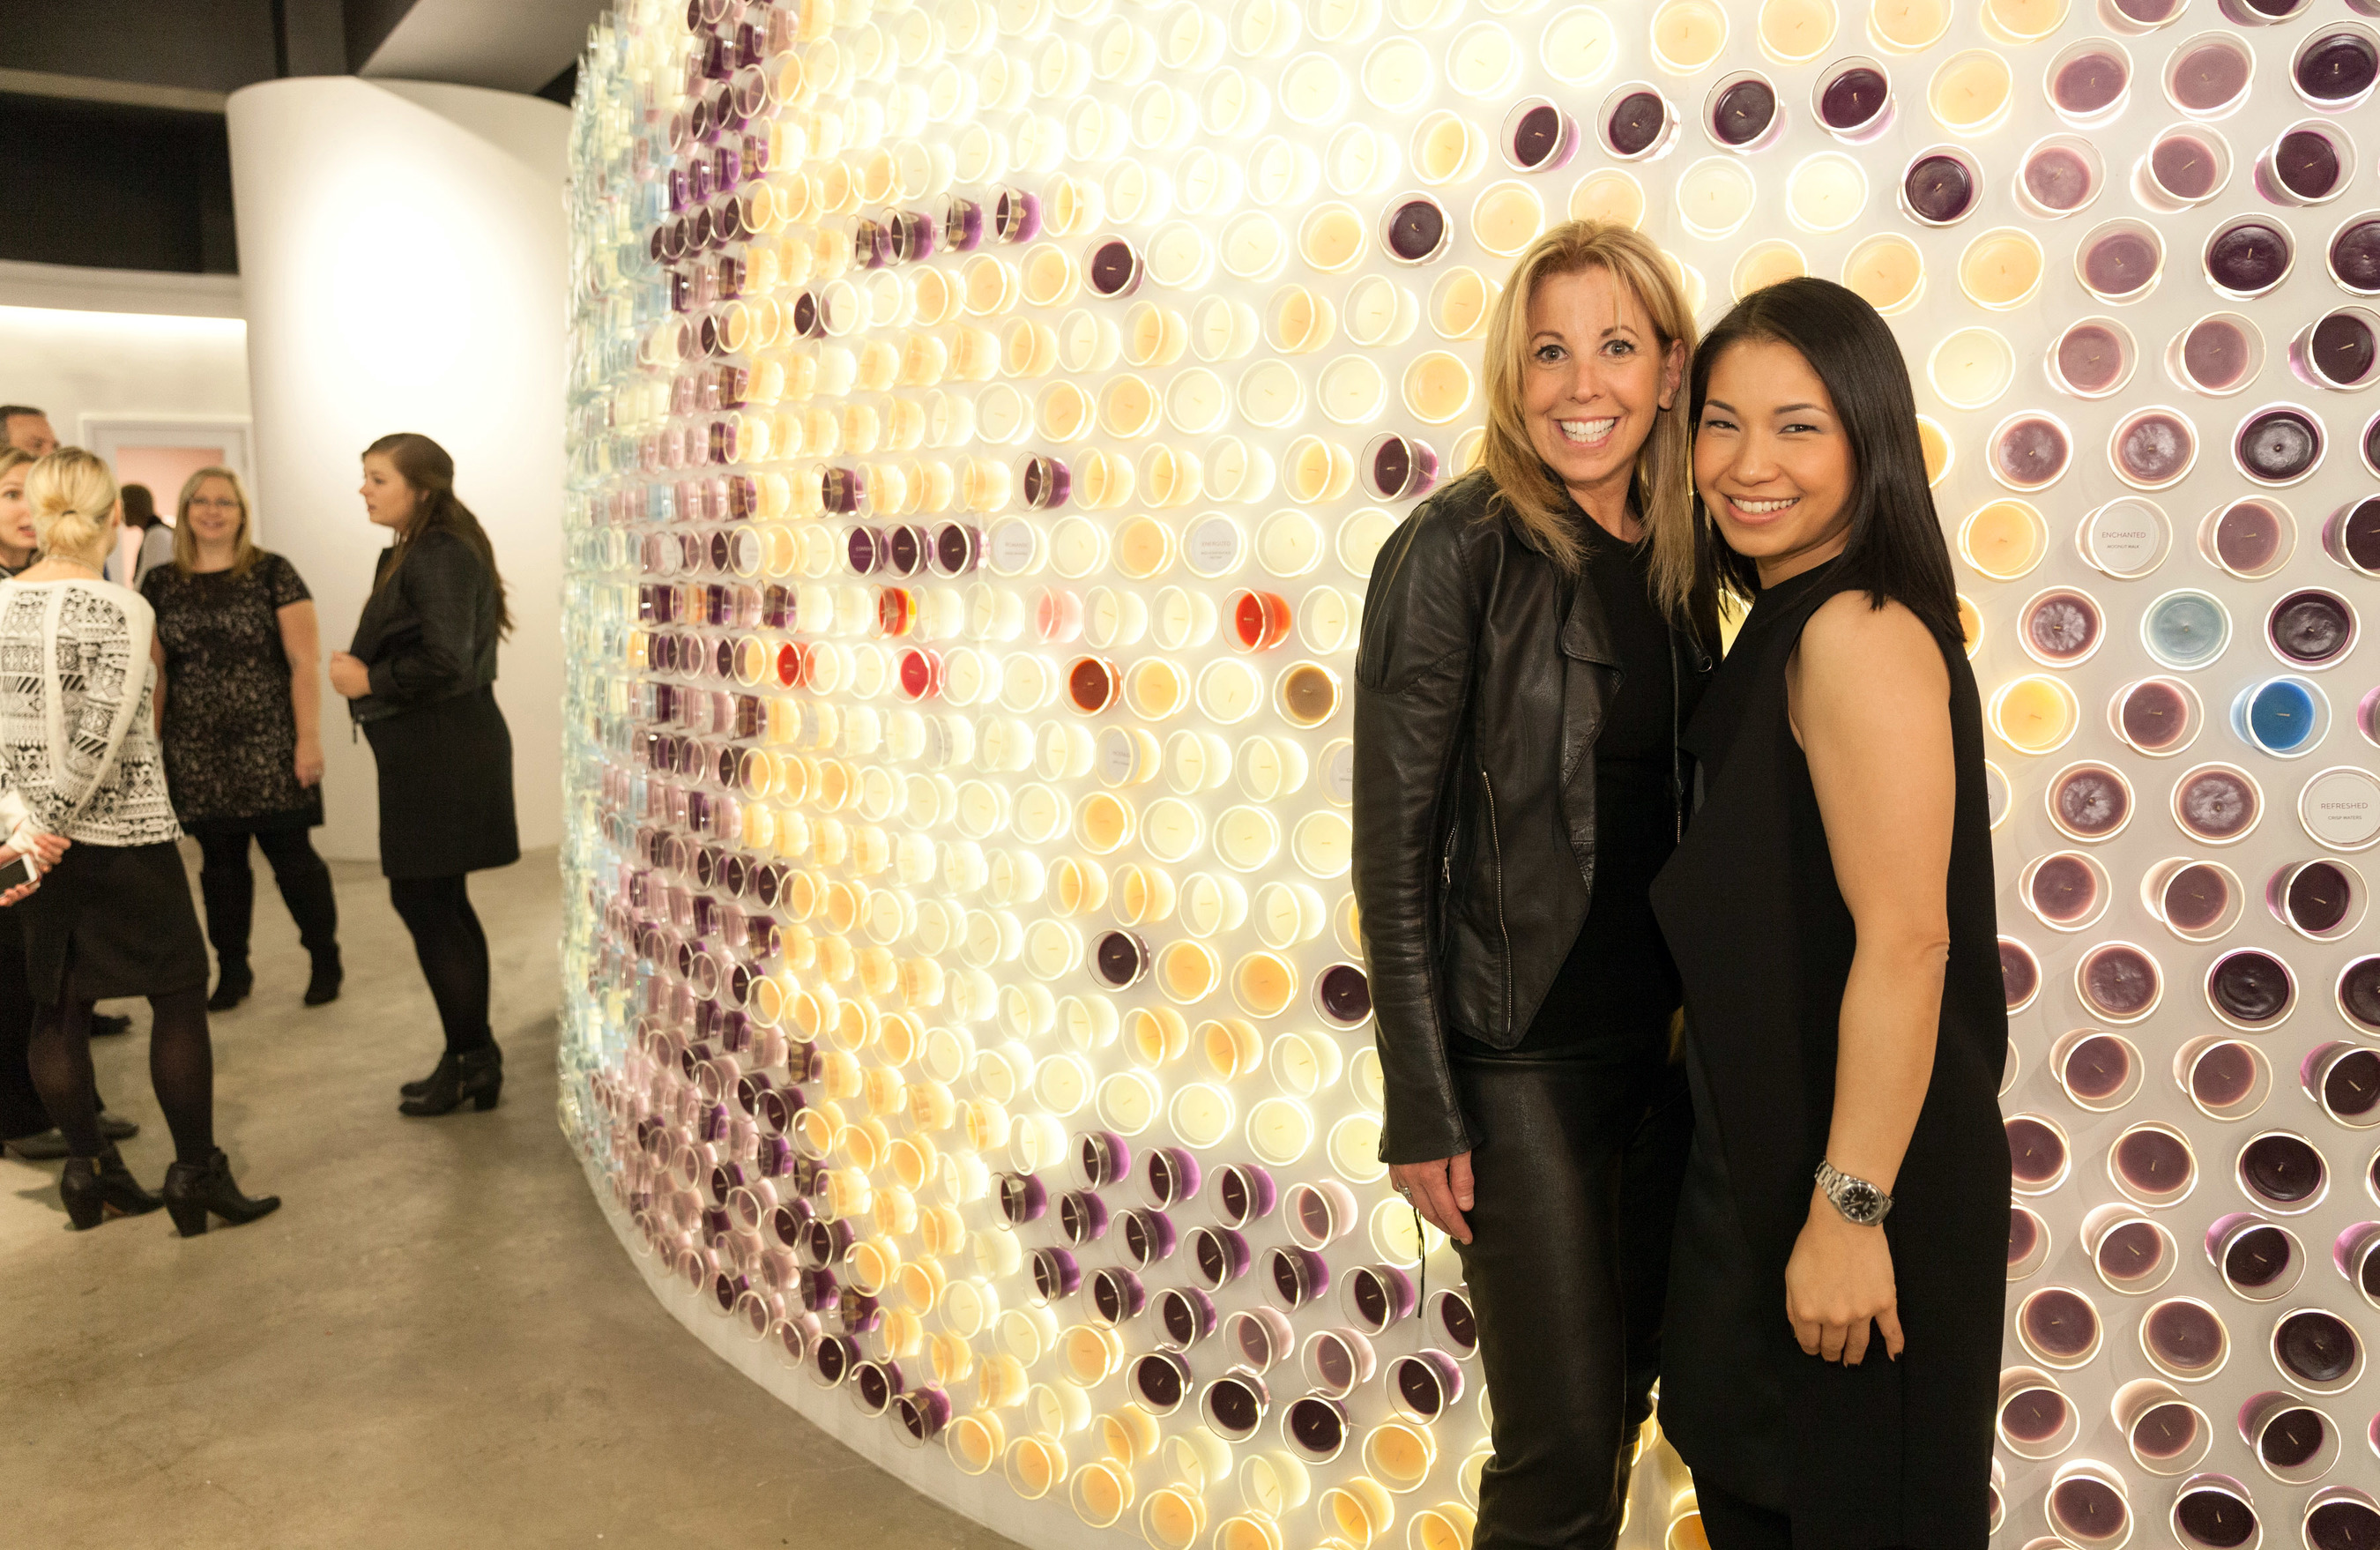 Celebrity fashion designer Pamela Dennis, left, and New York-based designer and architect Stephanie Goto celebrate the grand opening of the Glade(R) Boutique in front of Goto's scent-inspired creation compiled of nearly 1,500 candles in 18 Glade(R) scents Monday, Nov. 17, 2014 in New York.